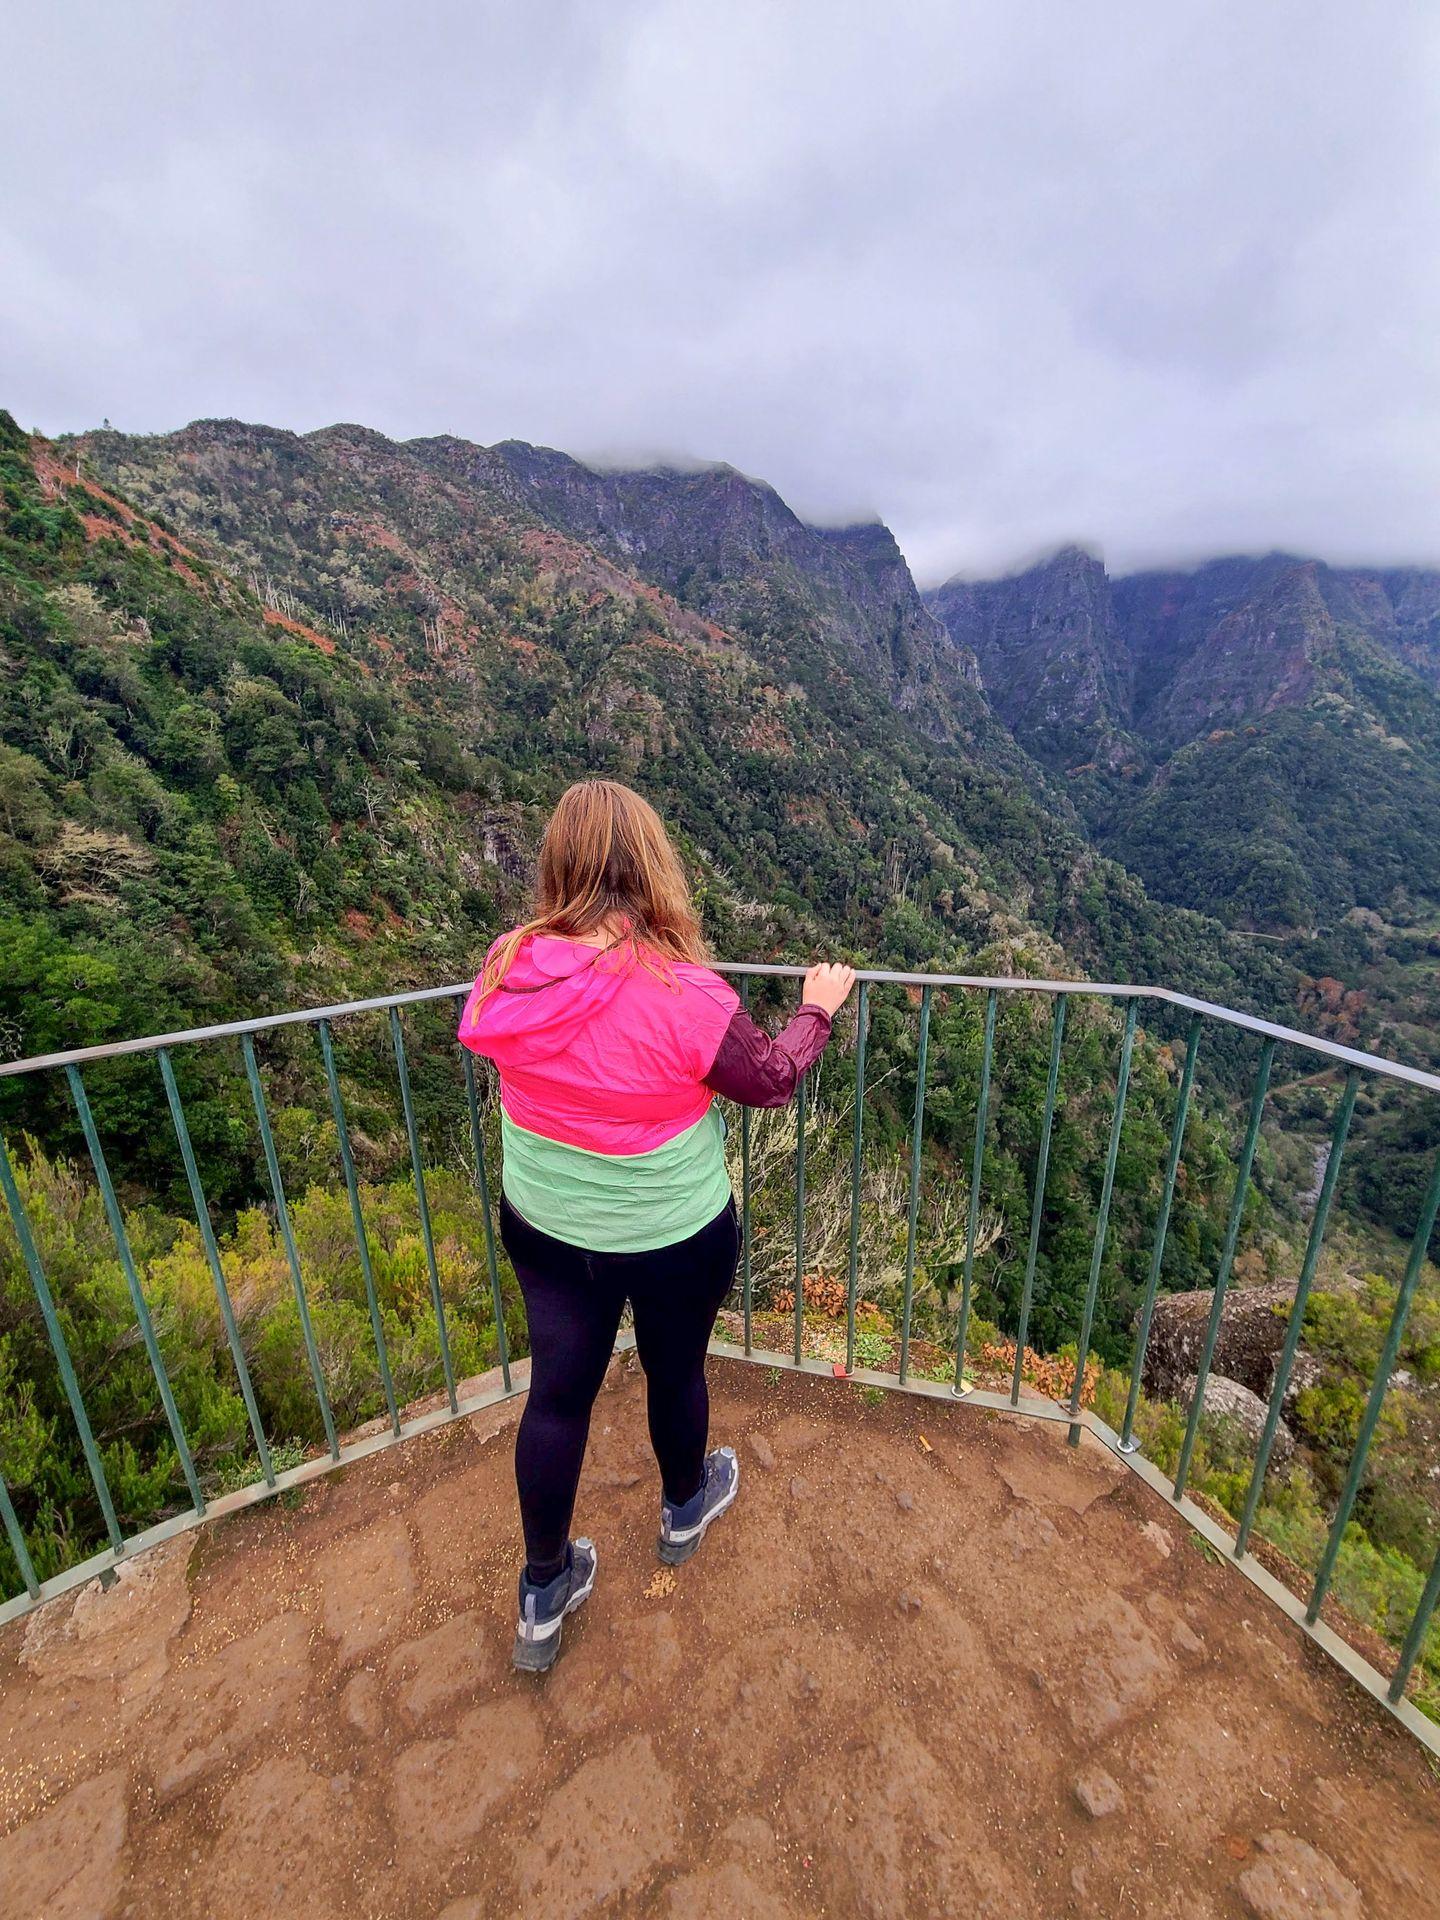 Lydia looking at the view of mountains from the Vereda dos Balcoes trail